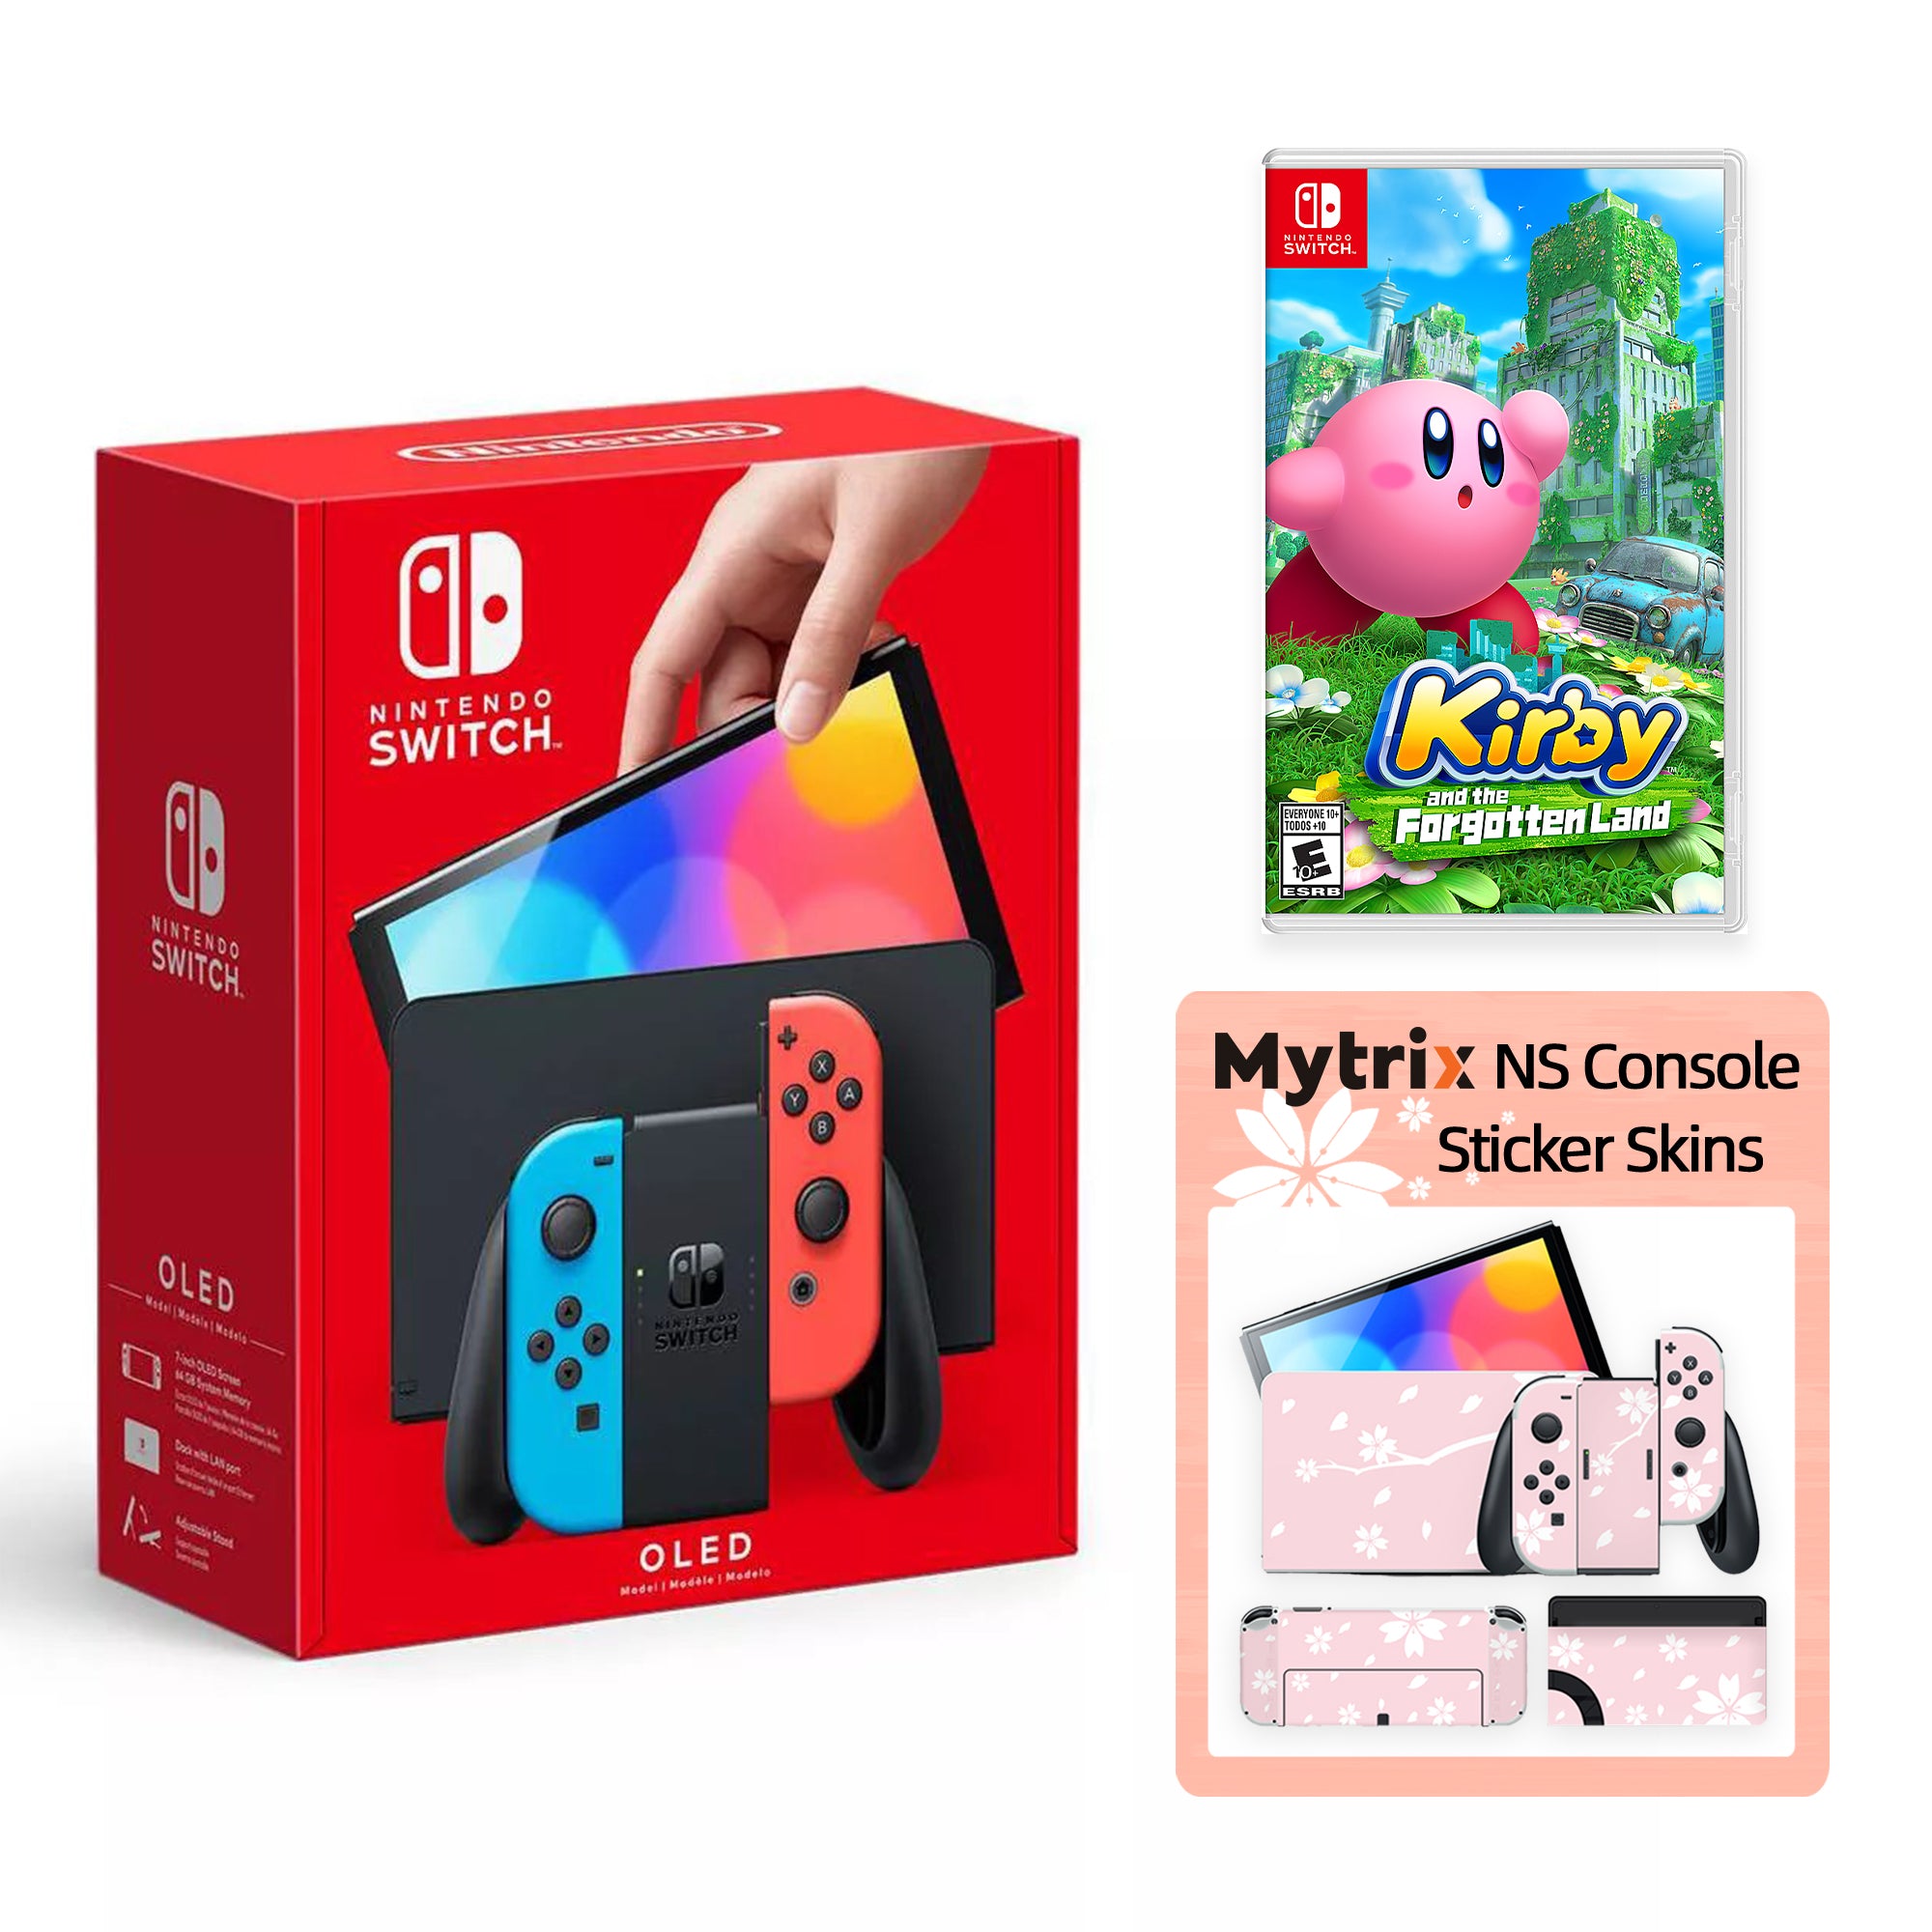 2022 New Nintendo Switch OLED Model Neon Red Blue Joy Con 64GB Console Improved HD Screen & LAN-Port Dock with Kirby and the Forgotten Land, Mytrix Full Body Skin Sticker - Sakura Pink